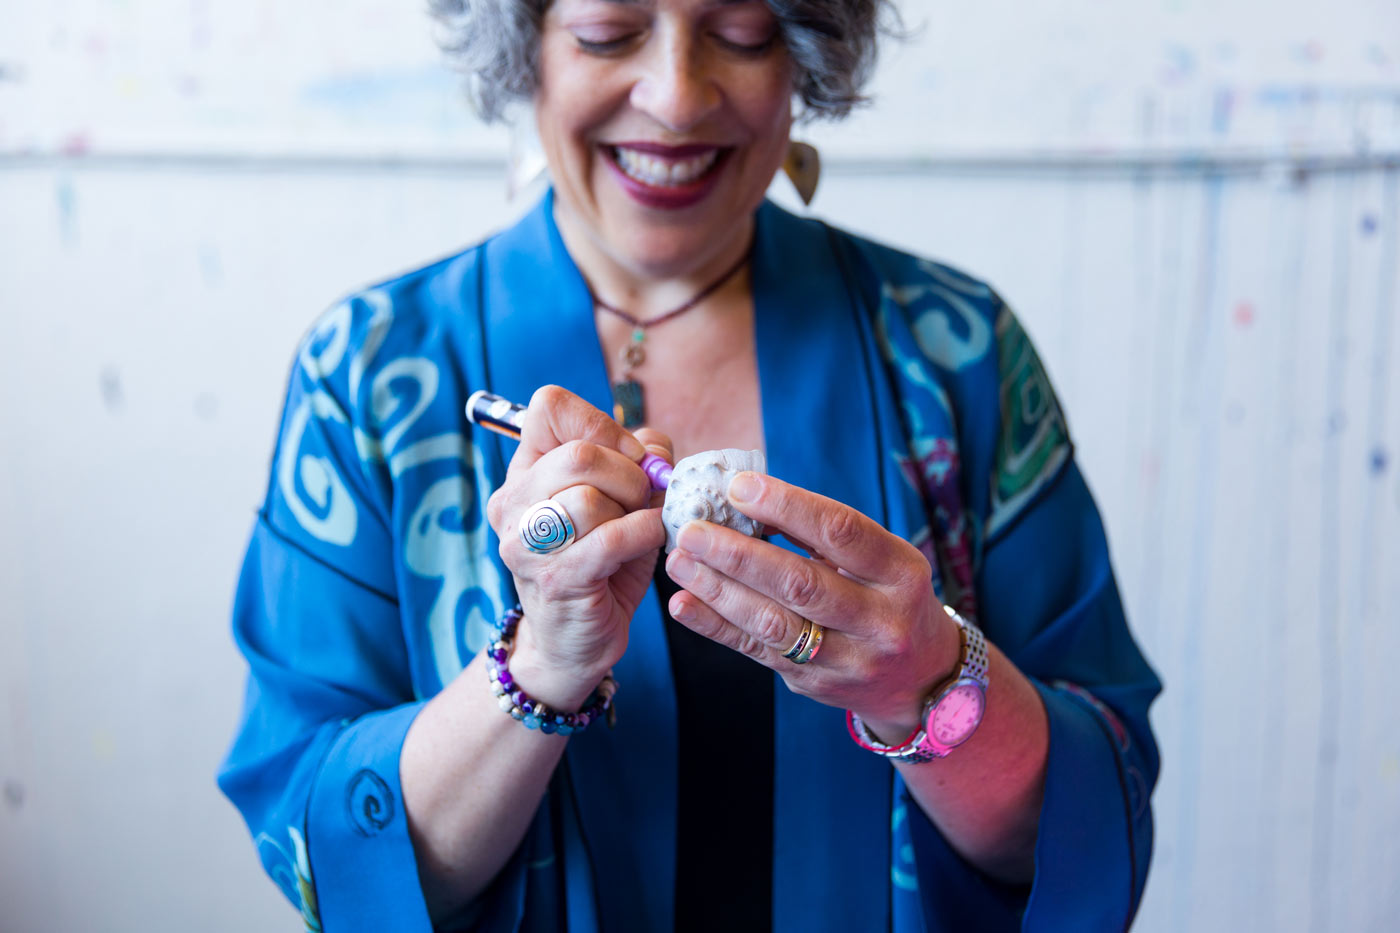 Photo: Karen Erlichman in a vibrant blue  smock, smiling as she decorates a shell.